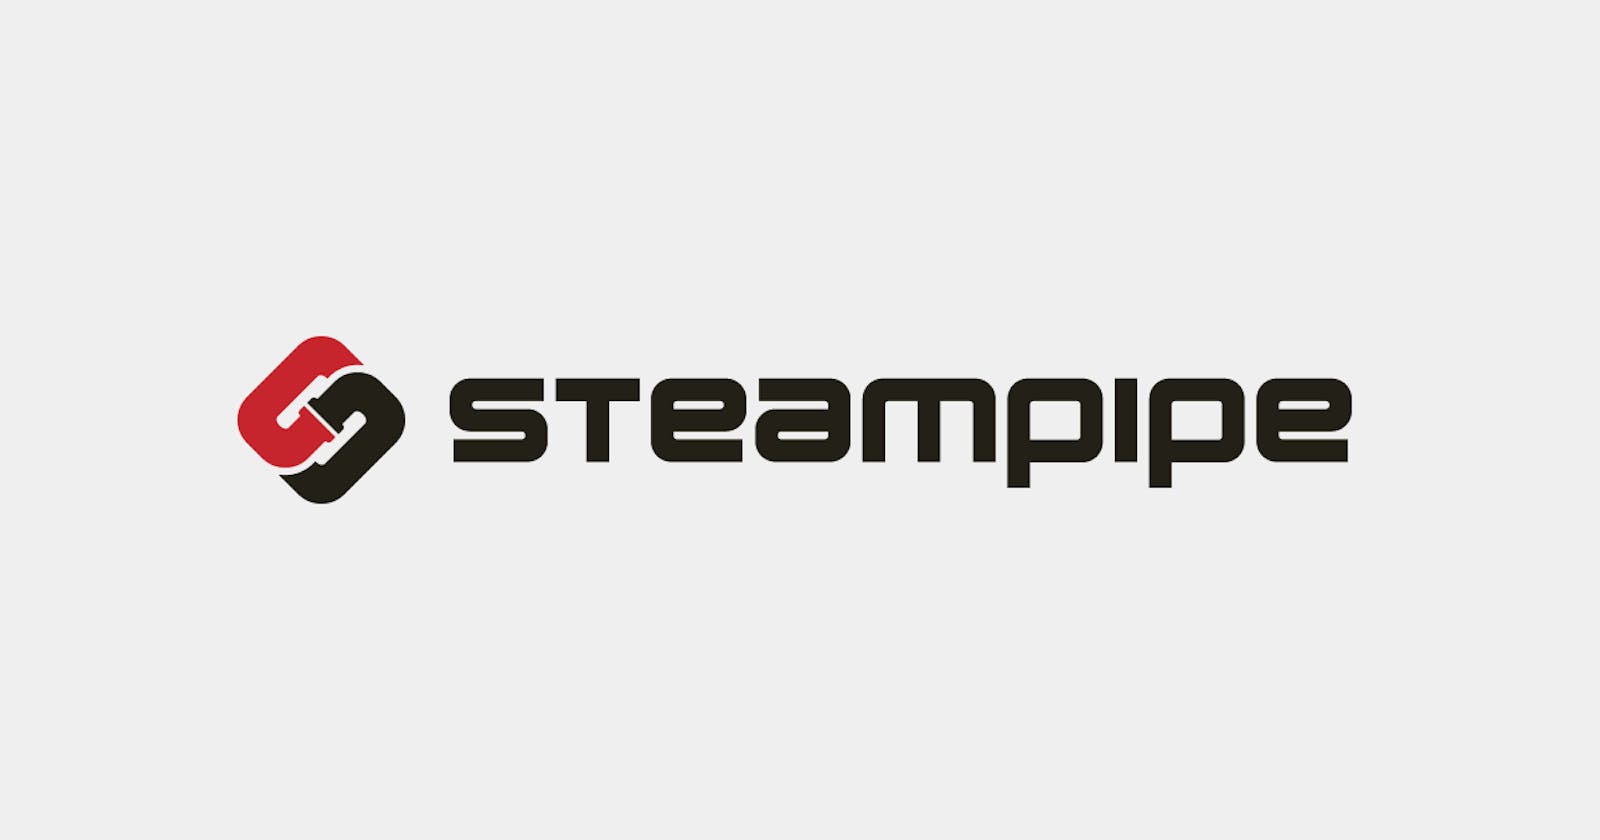 Steampipe: Getting Started